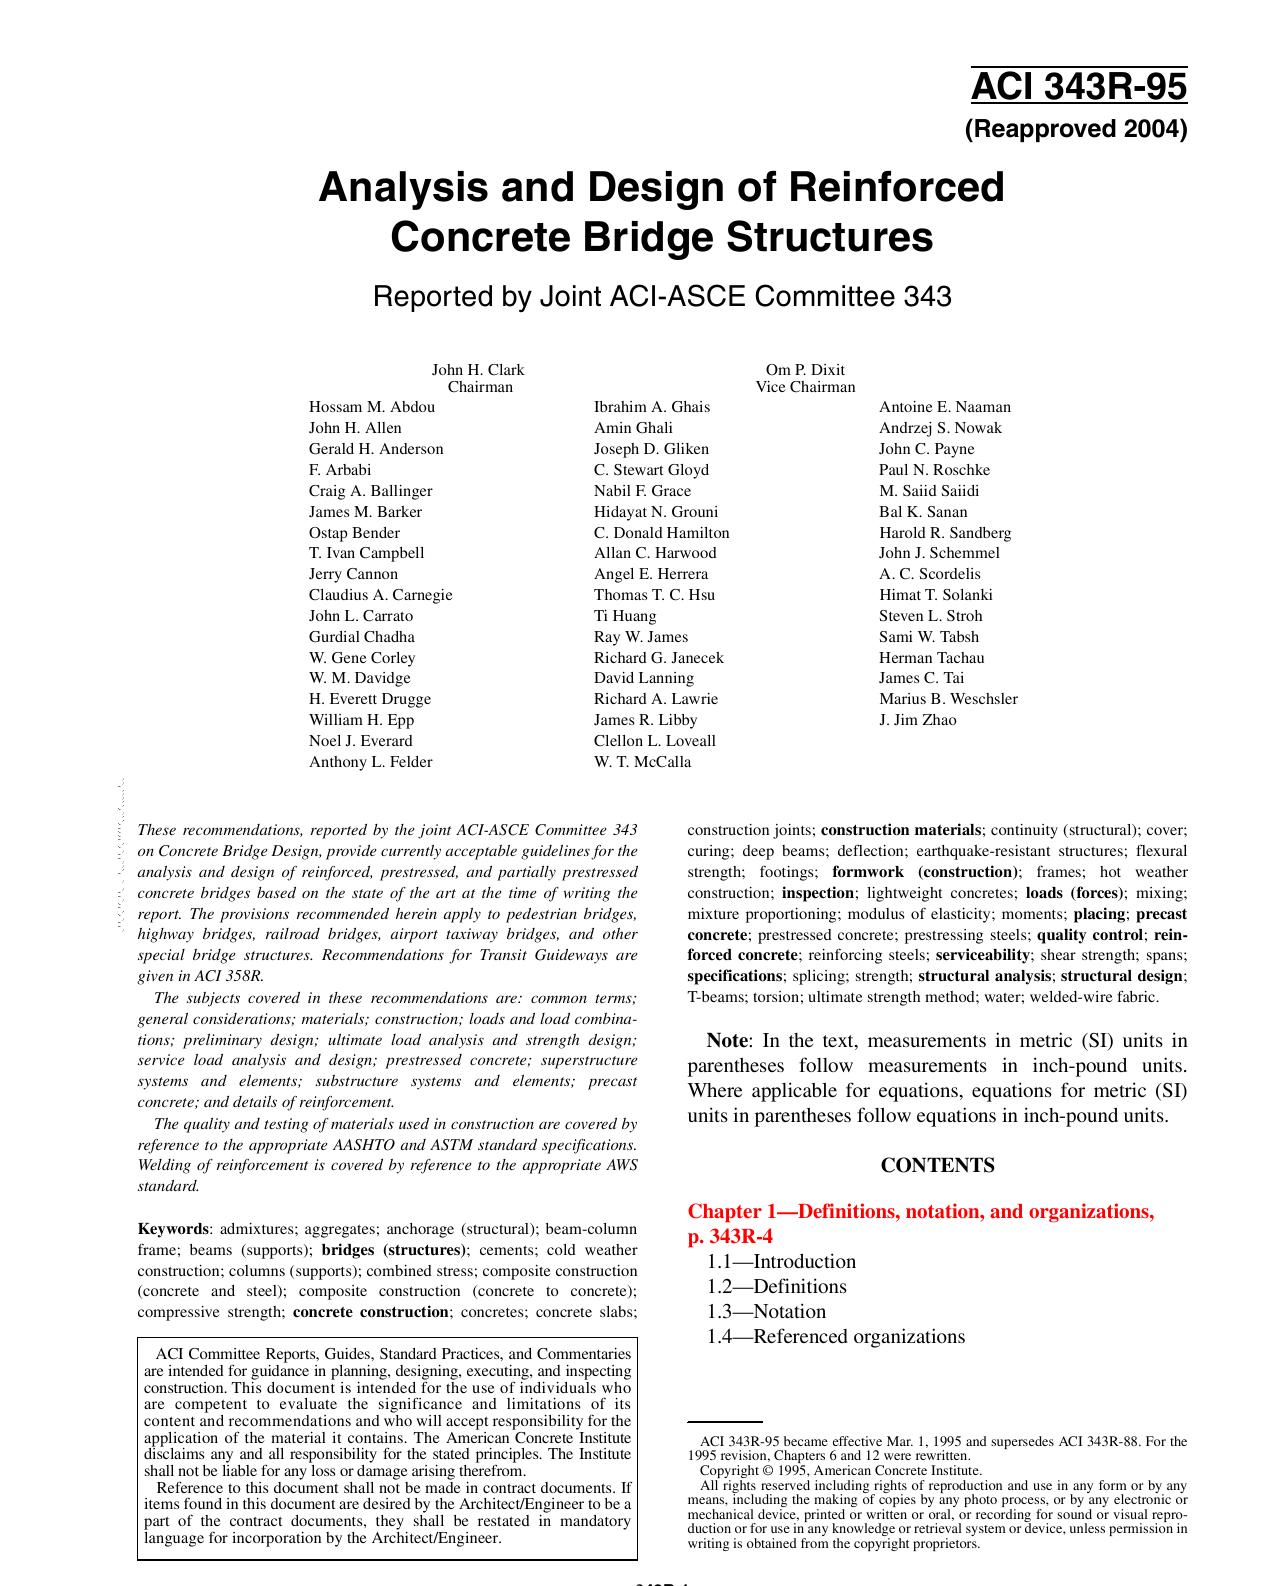 Analysis and Design of Reinforced Concrete Bridge Structures.pdf